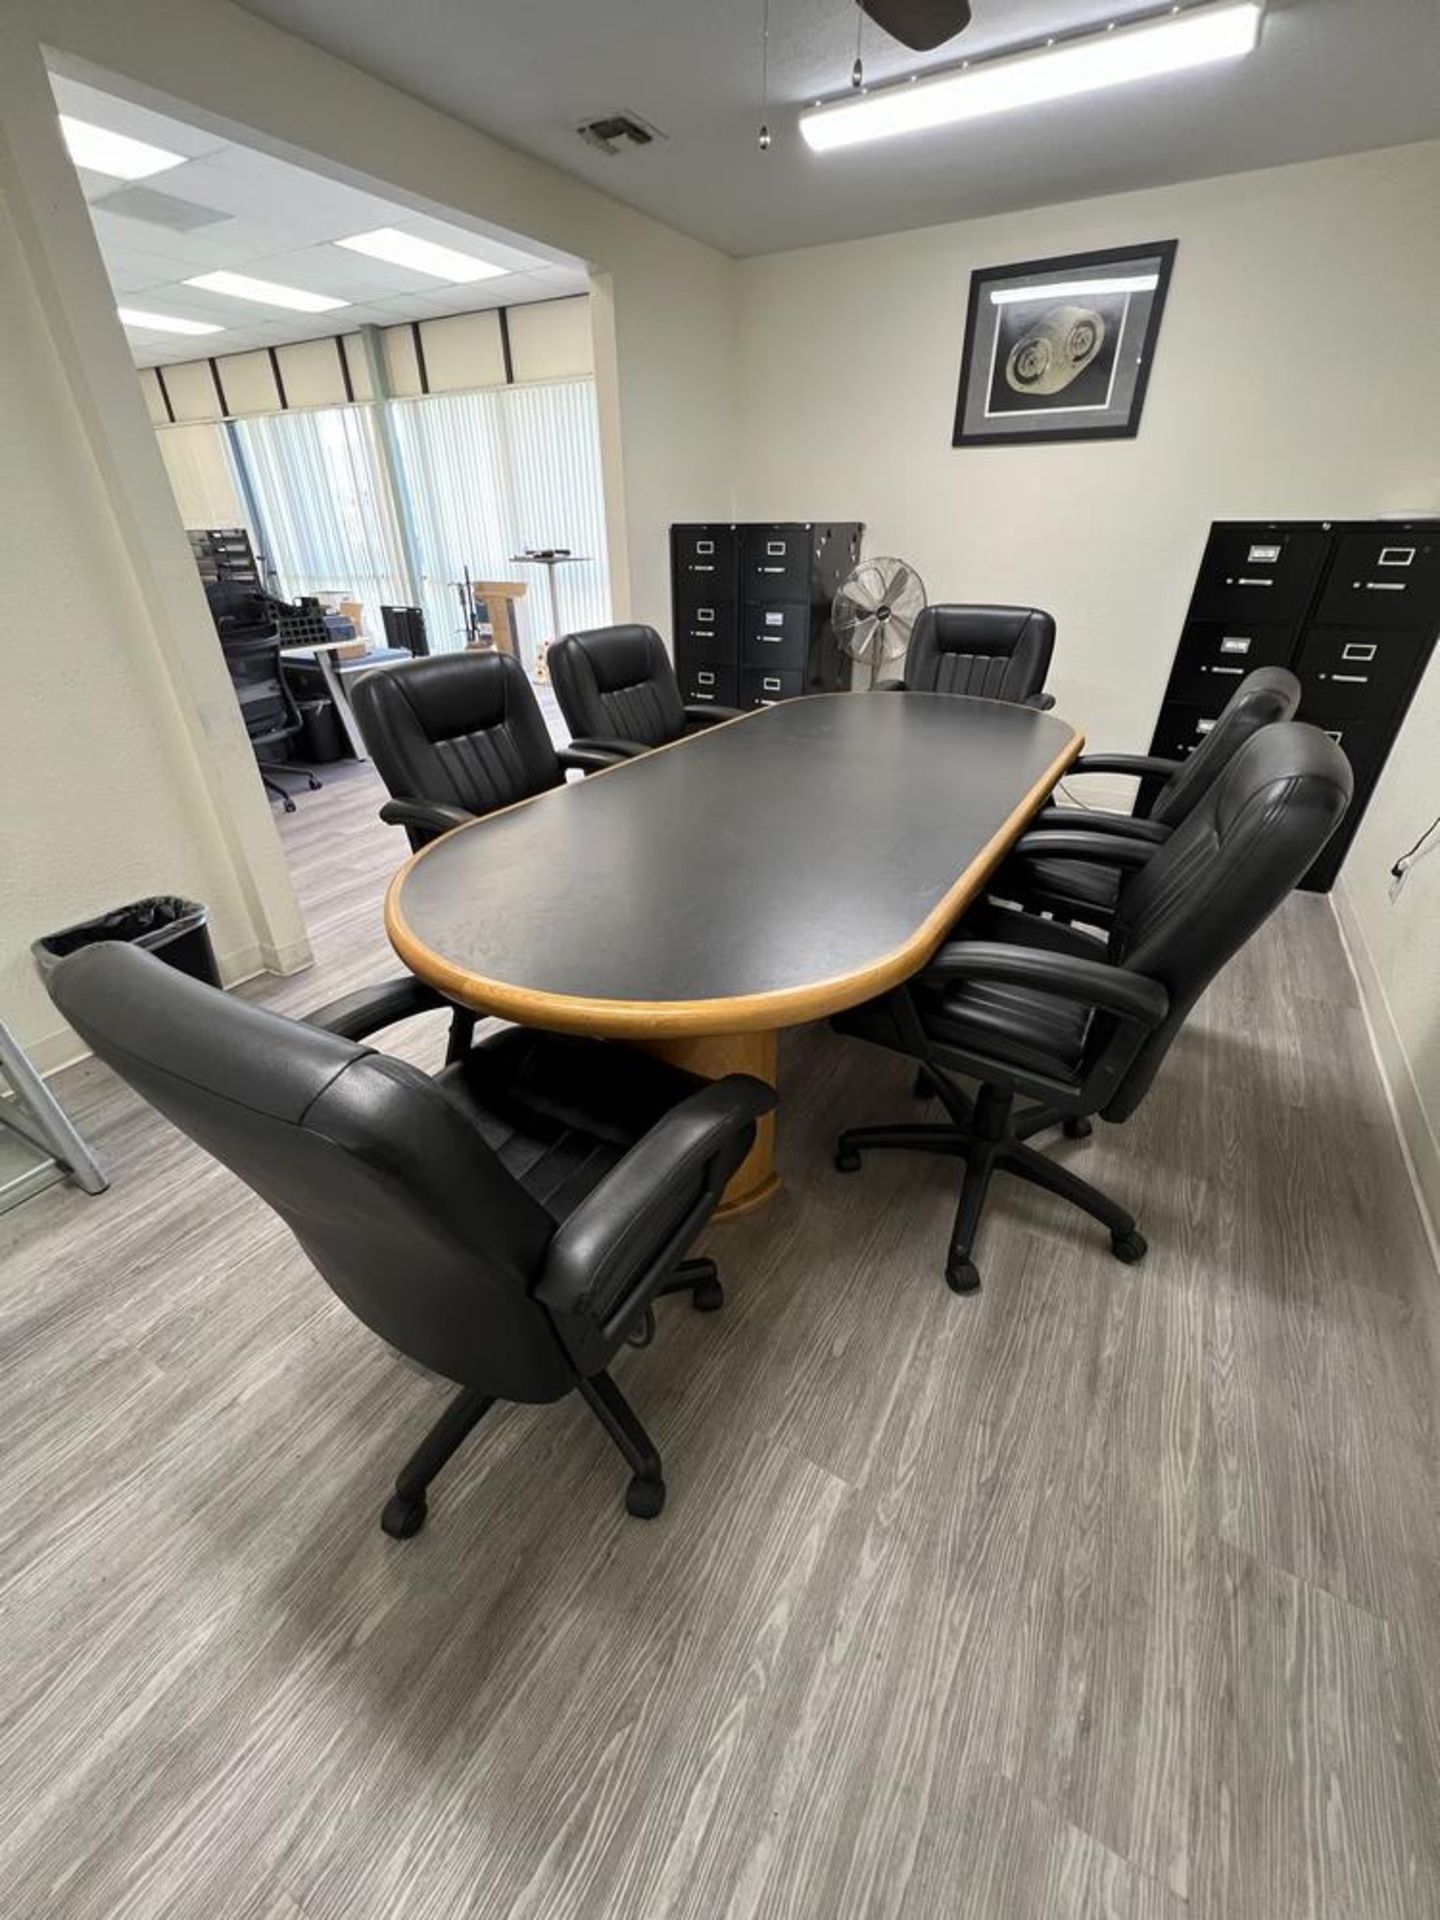 Conference Table With (6) Chairs 98" x 41 1/2" x 30" - Image 6 of 6